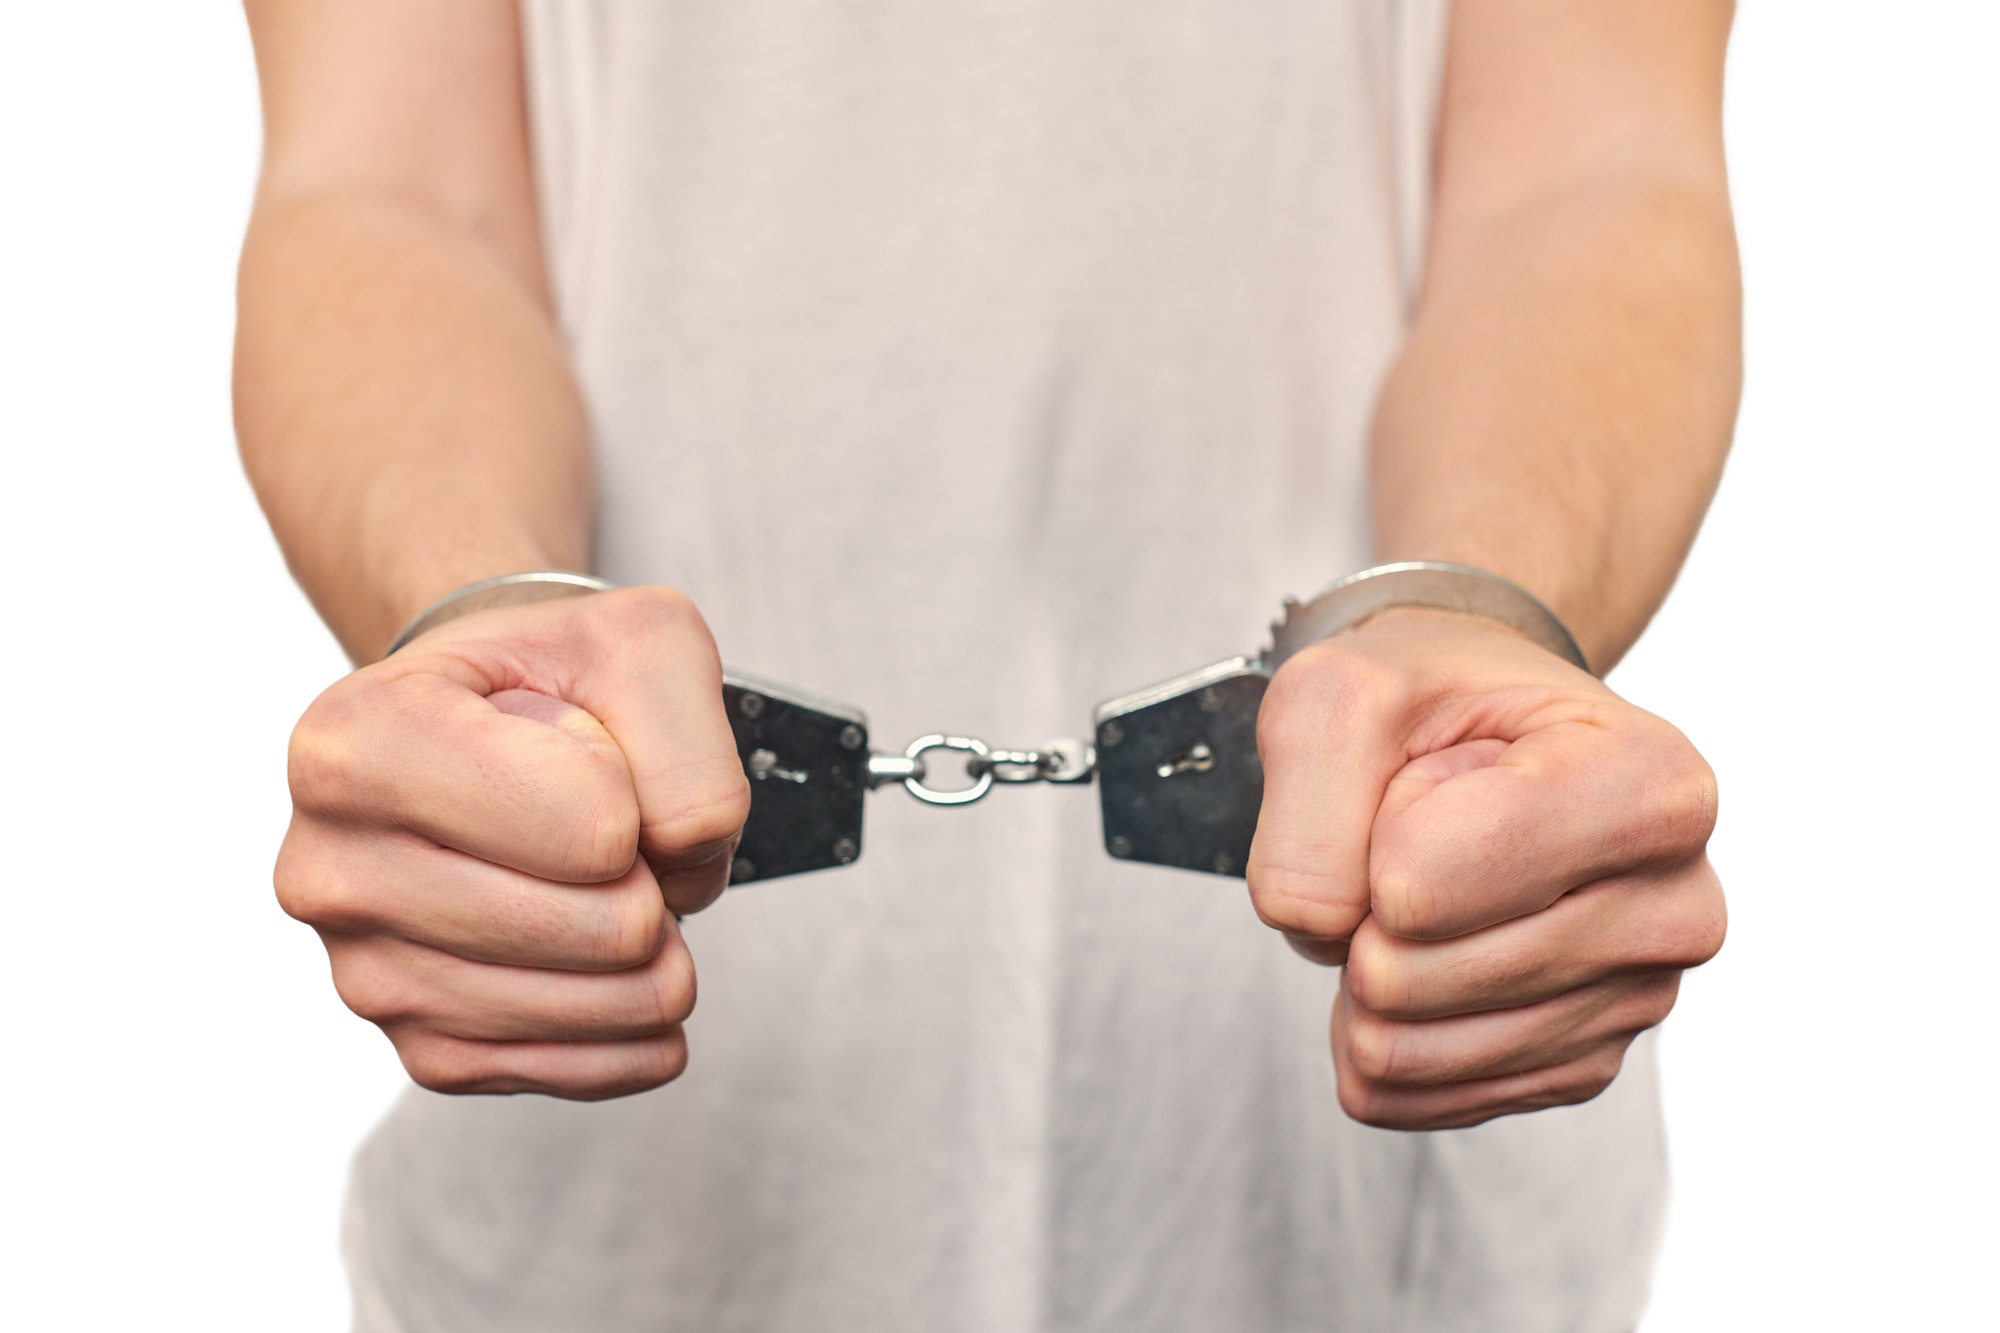 Hands of criminal in handcuffs, arrest of dangerous criminal, violation of law, white background